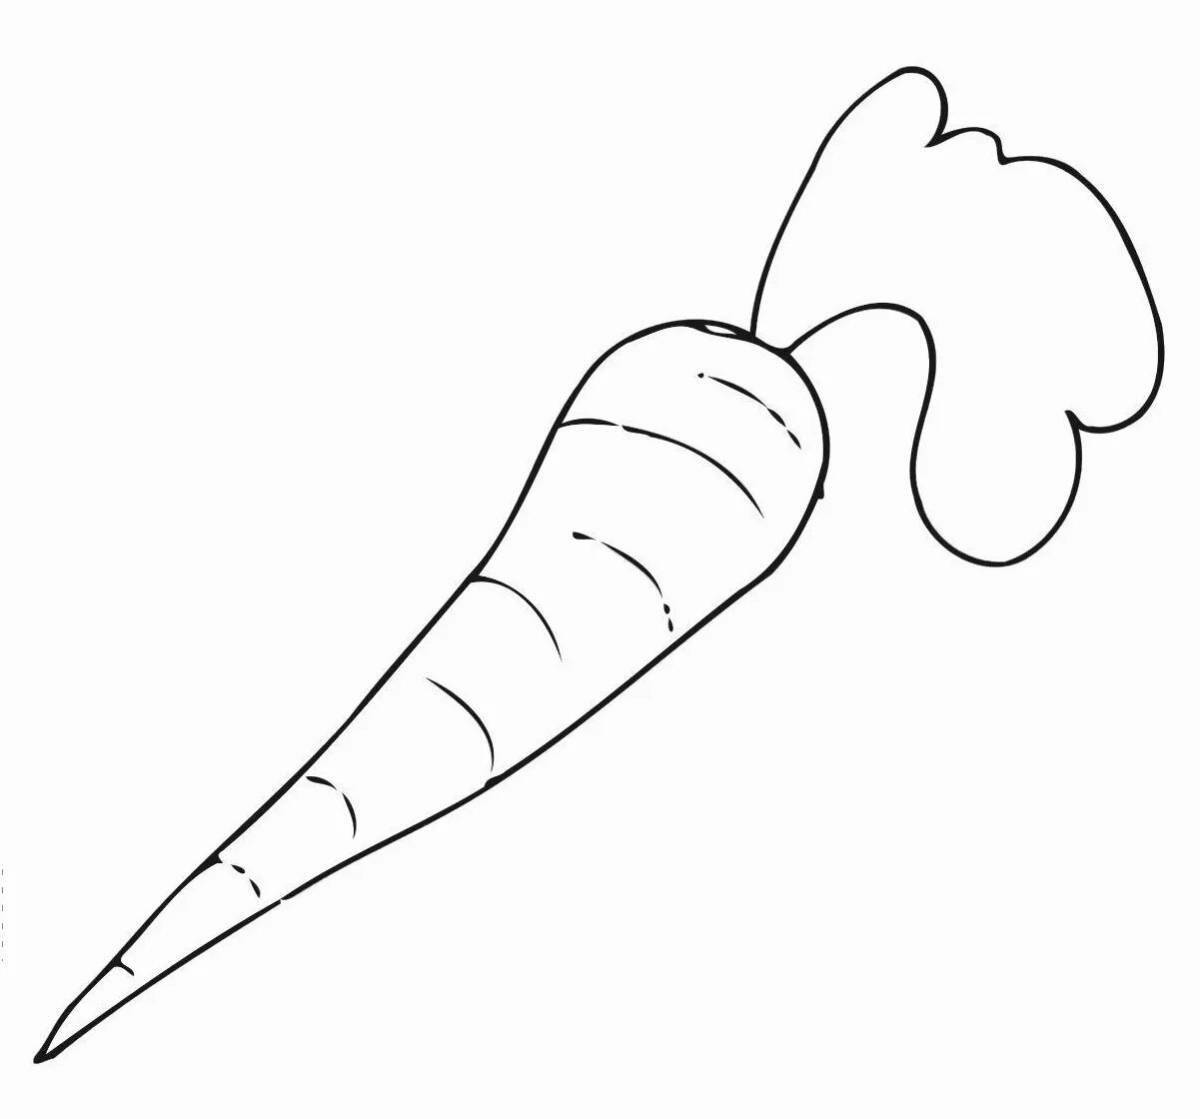 Interesting carrot pattern coloring page